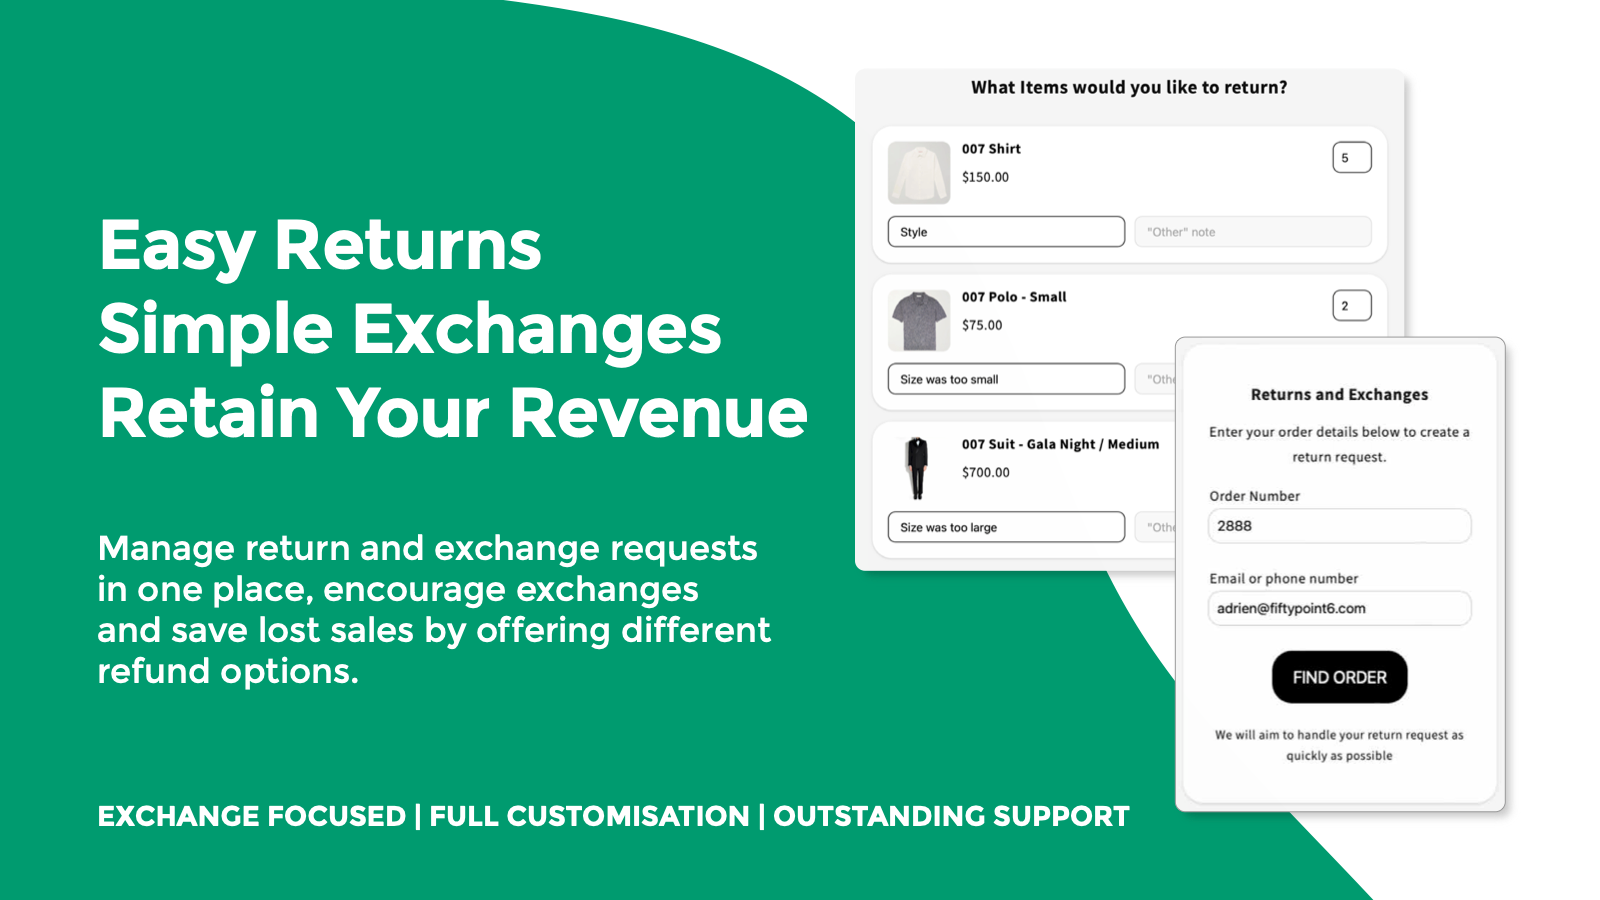 Exchange It - Manage return and exchange requests in one place